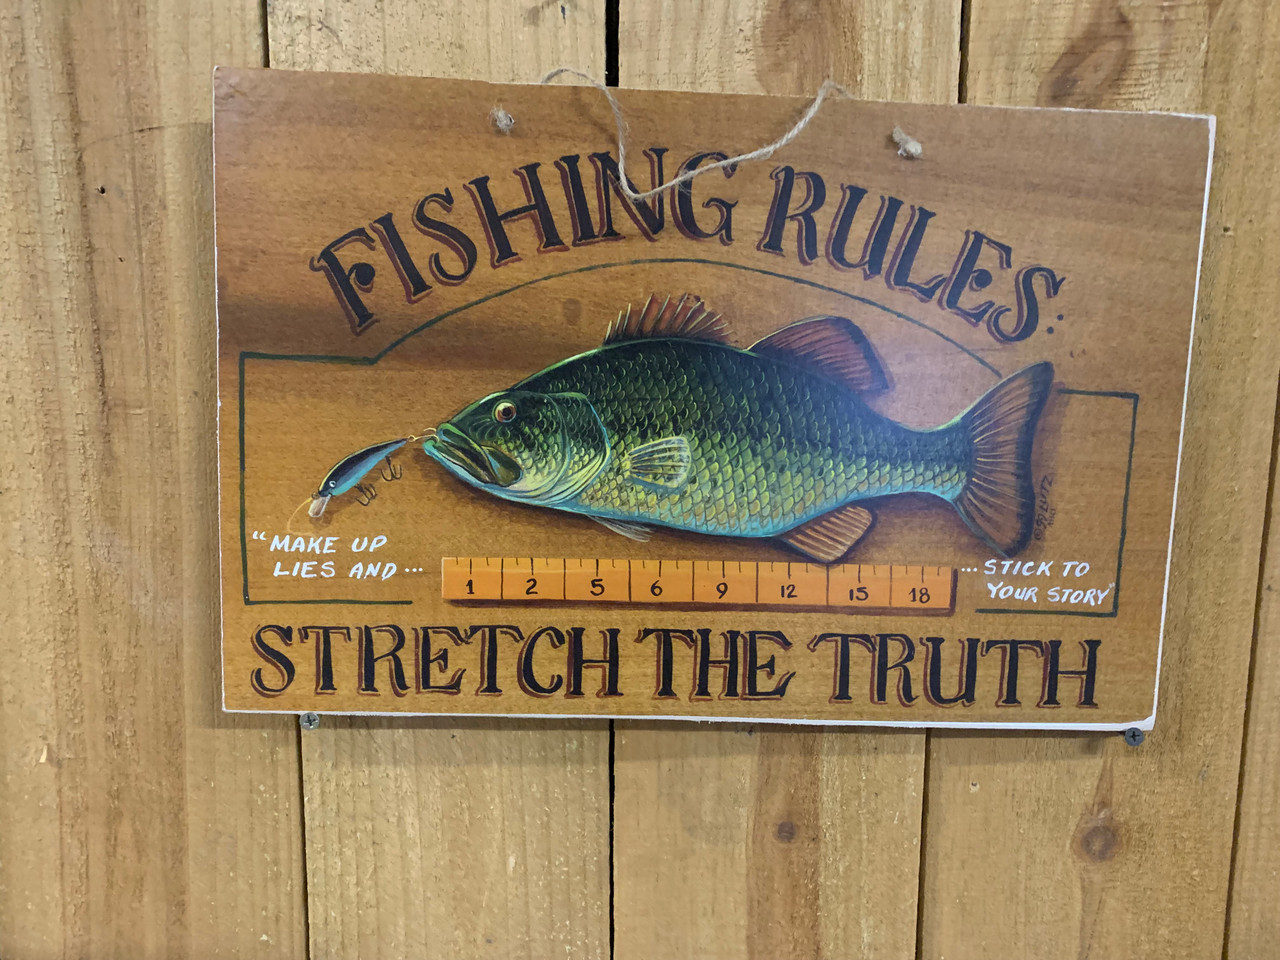 FISHING RULES: STRETCH THE TRUTH, MAKE UP LIES AND TICK TO YOUR STORY, WOOD  SIGN, 16